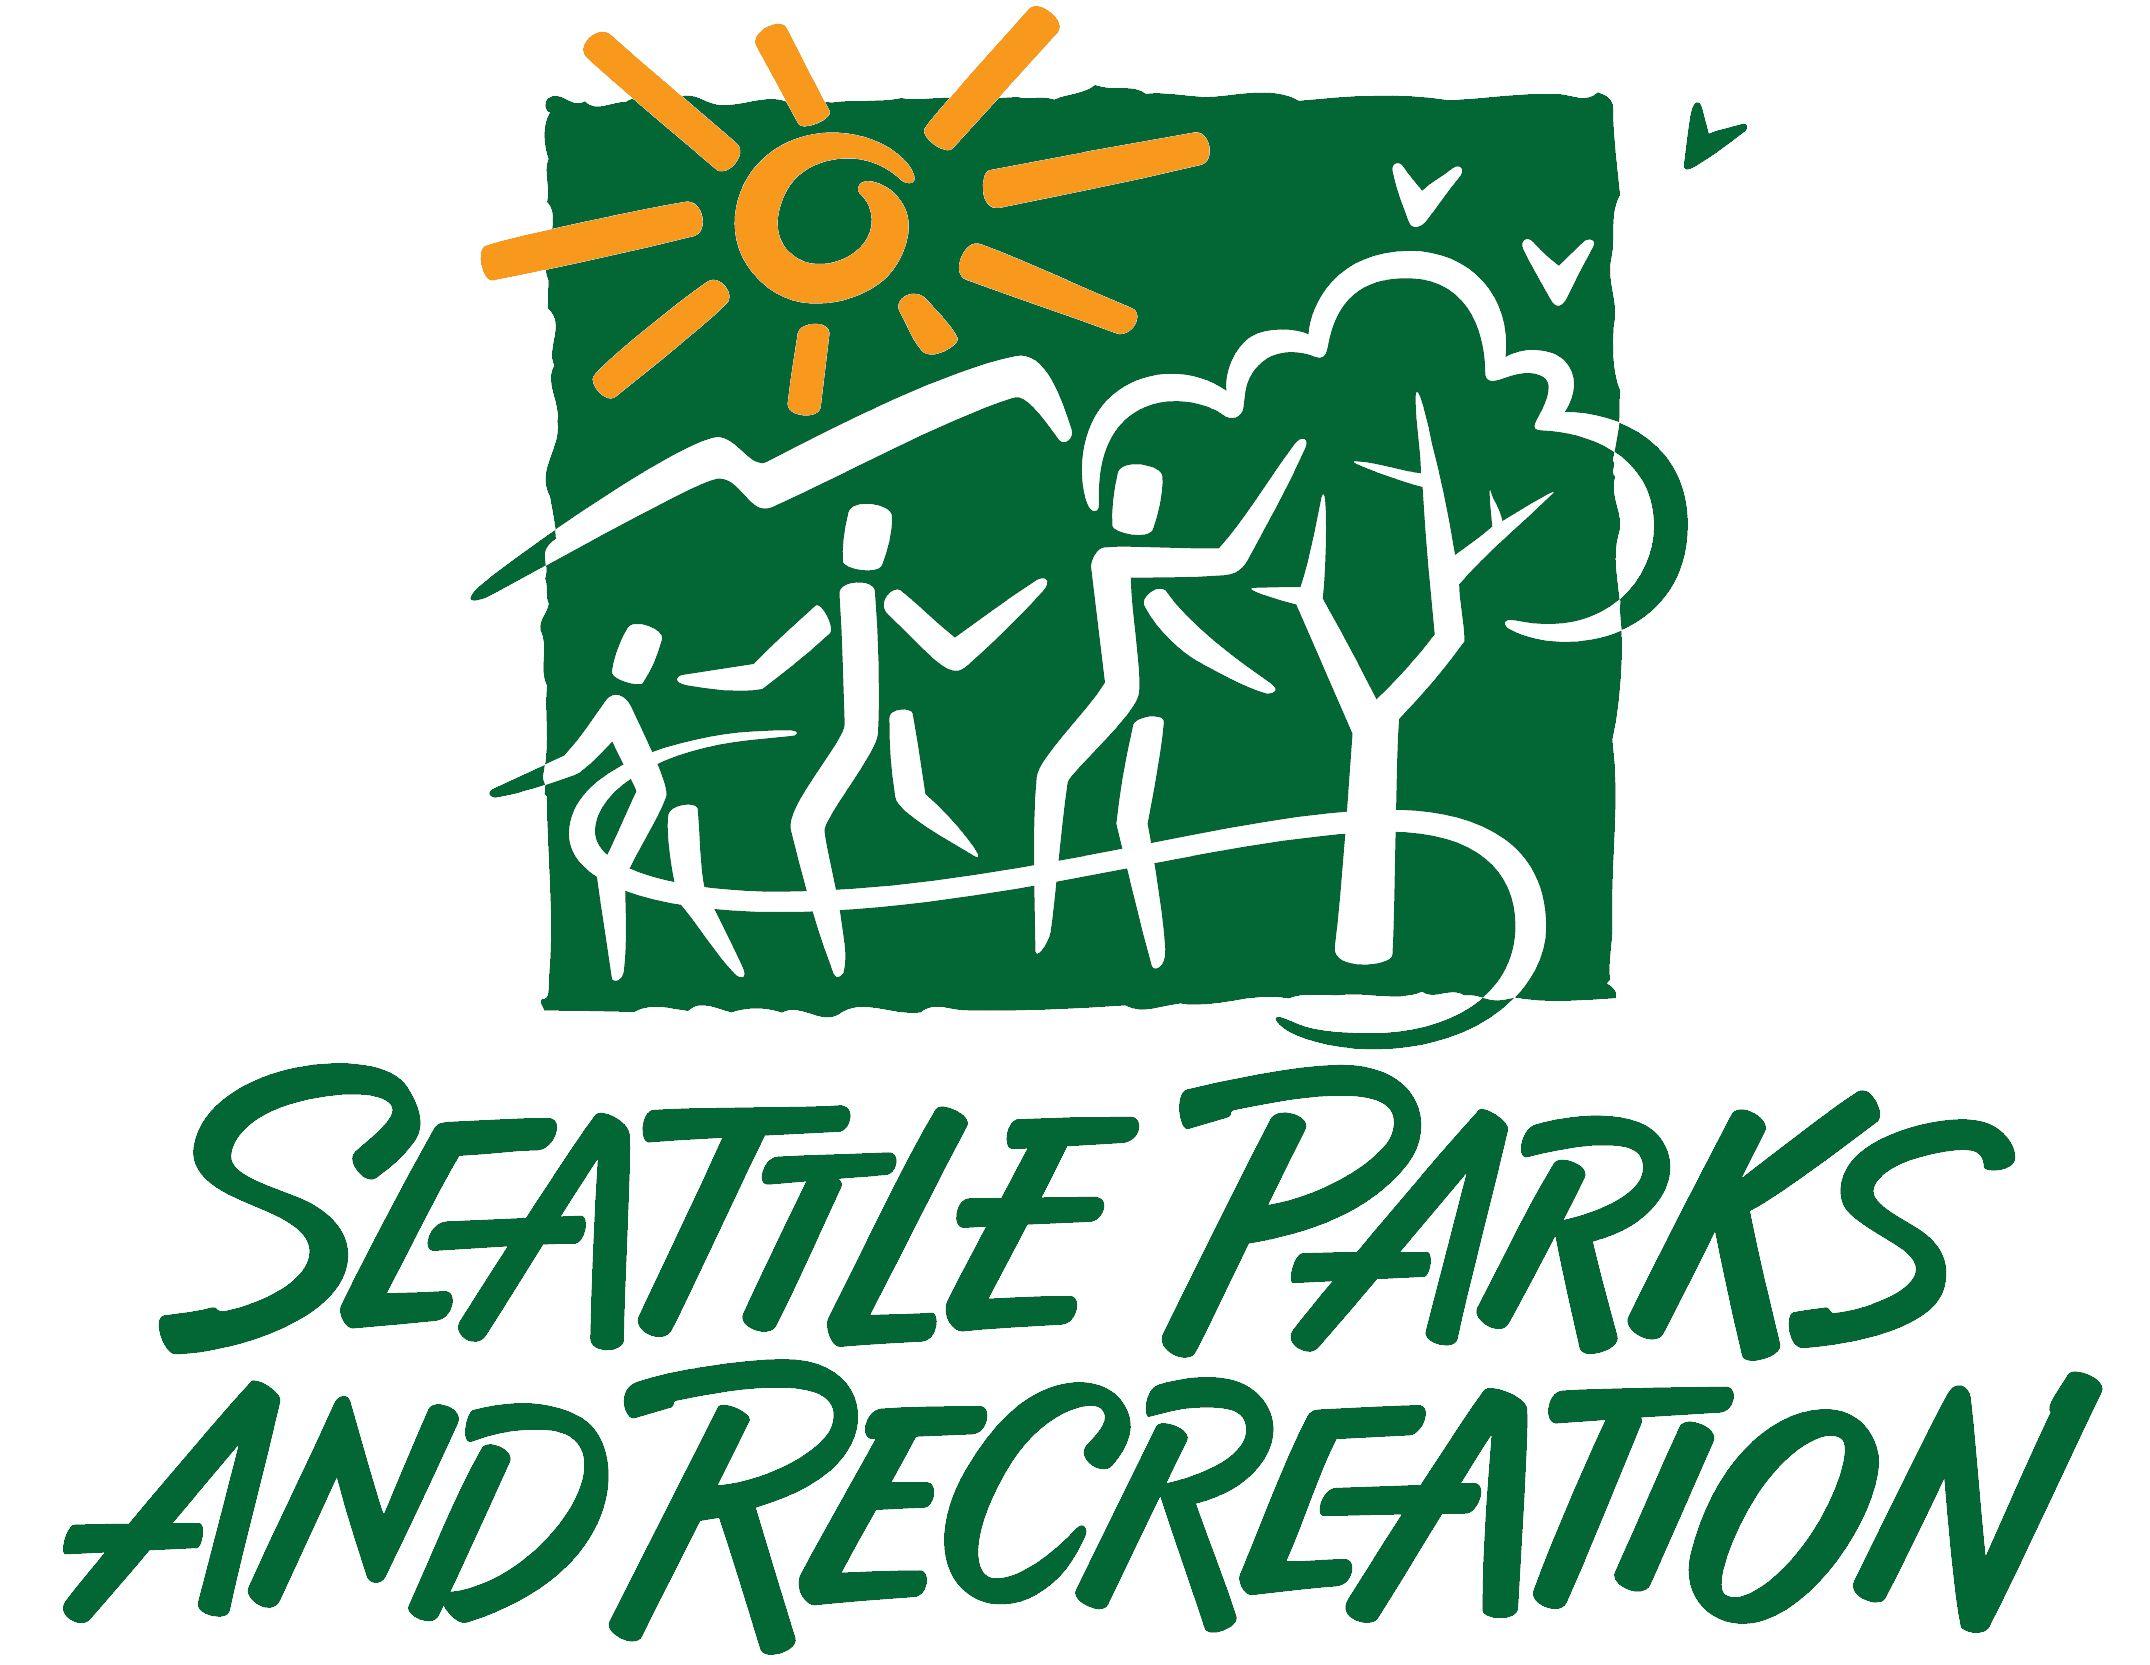 Parks and Recreation Logo - Seattle Parks & Recreation Logo